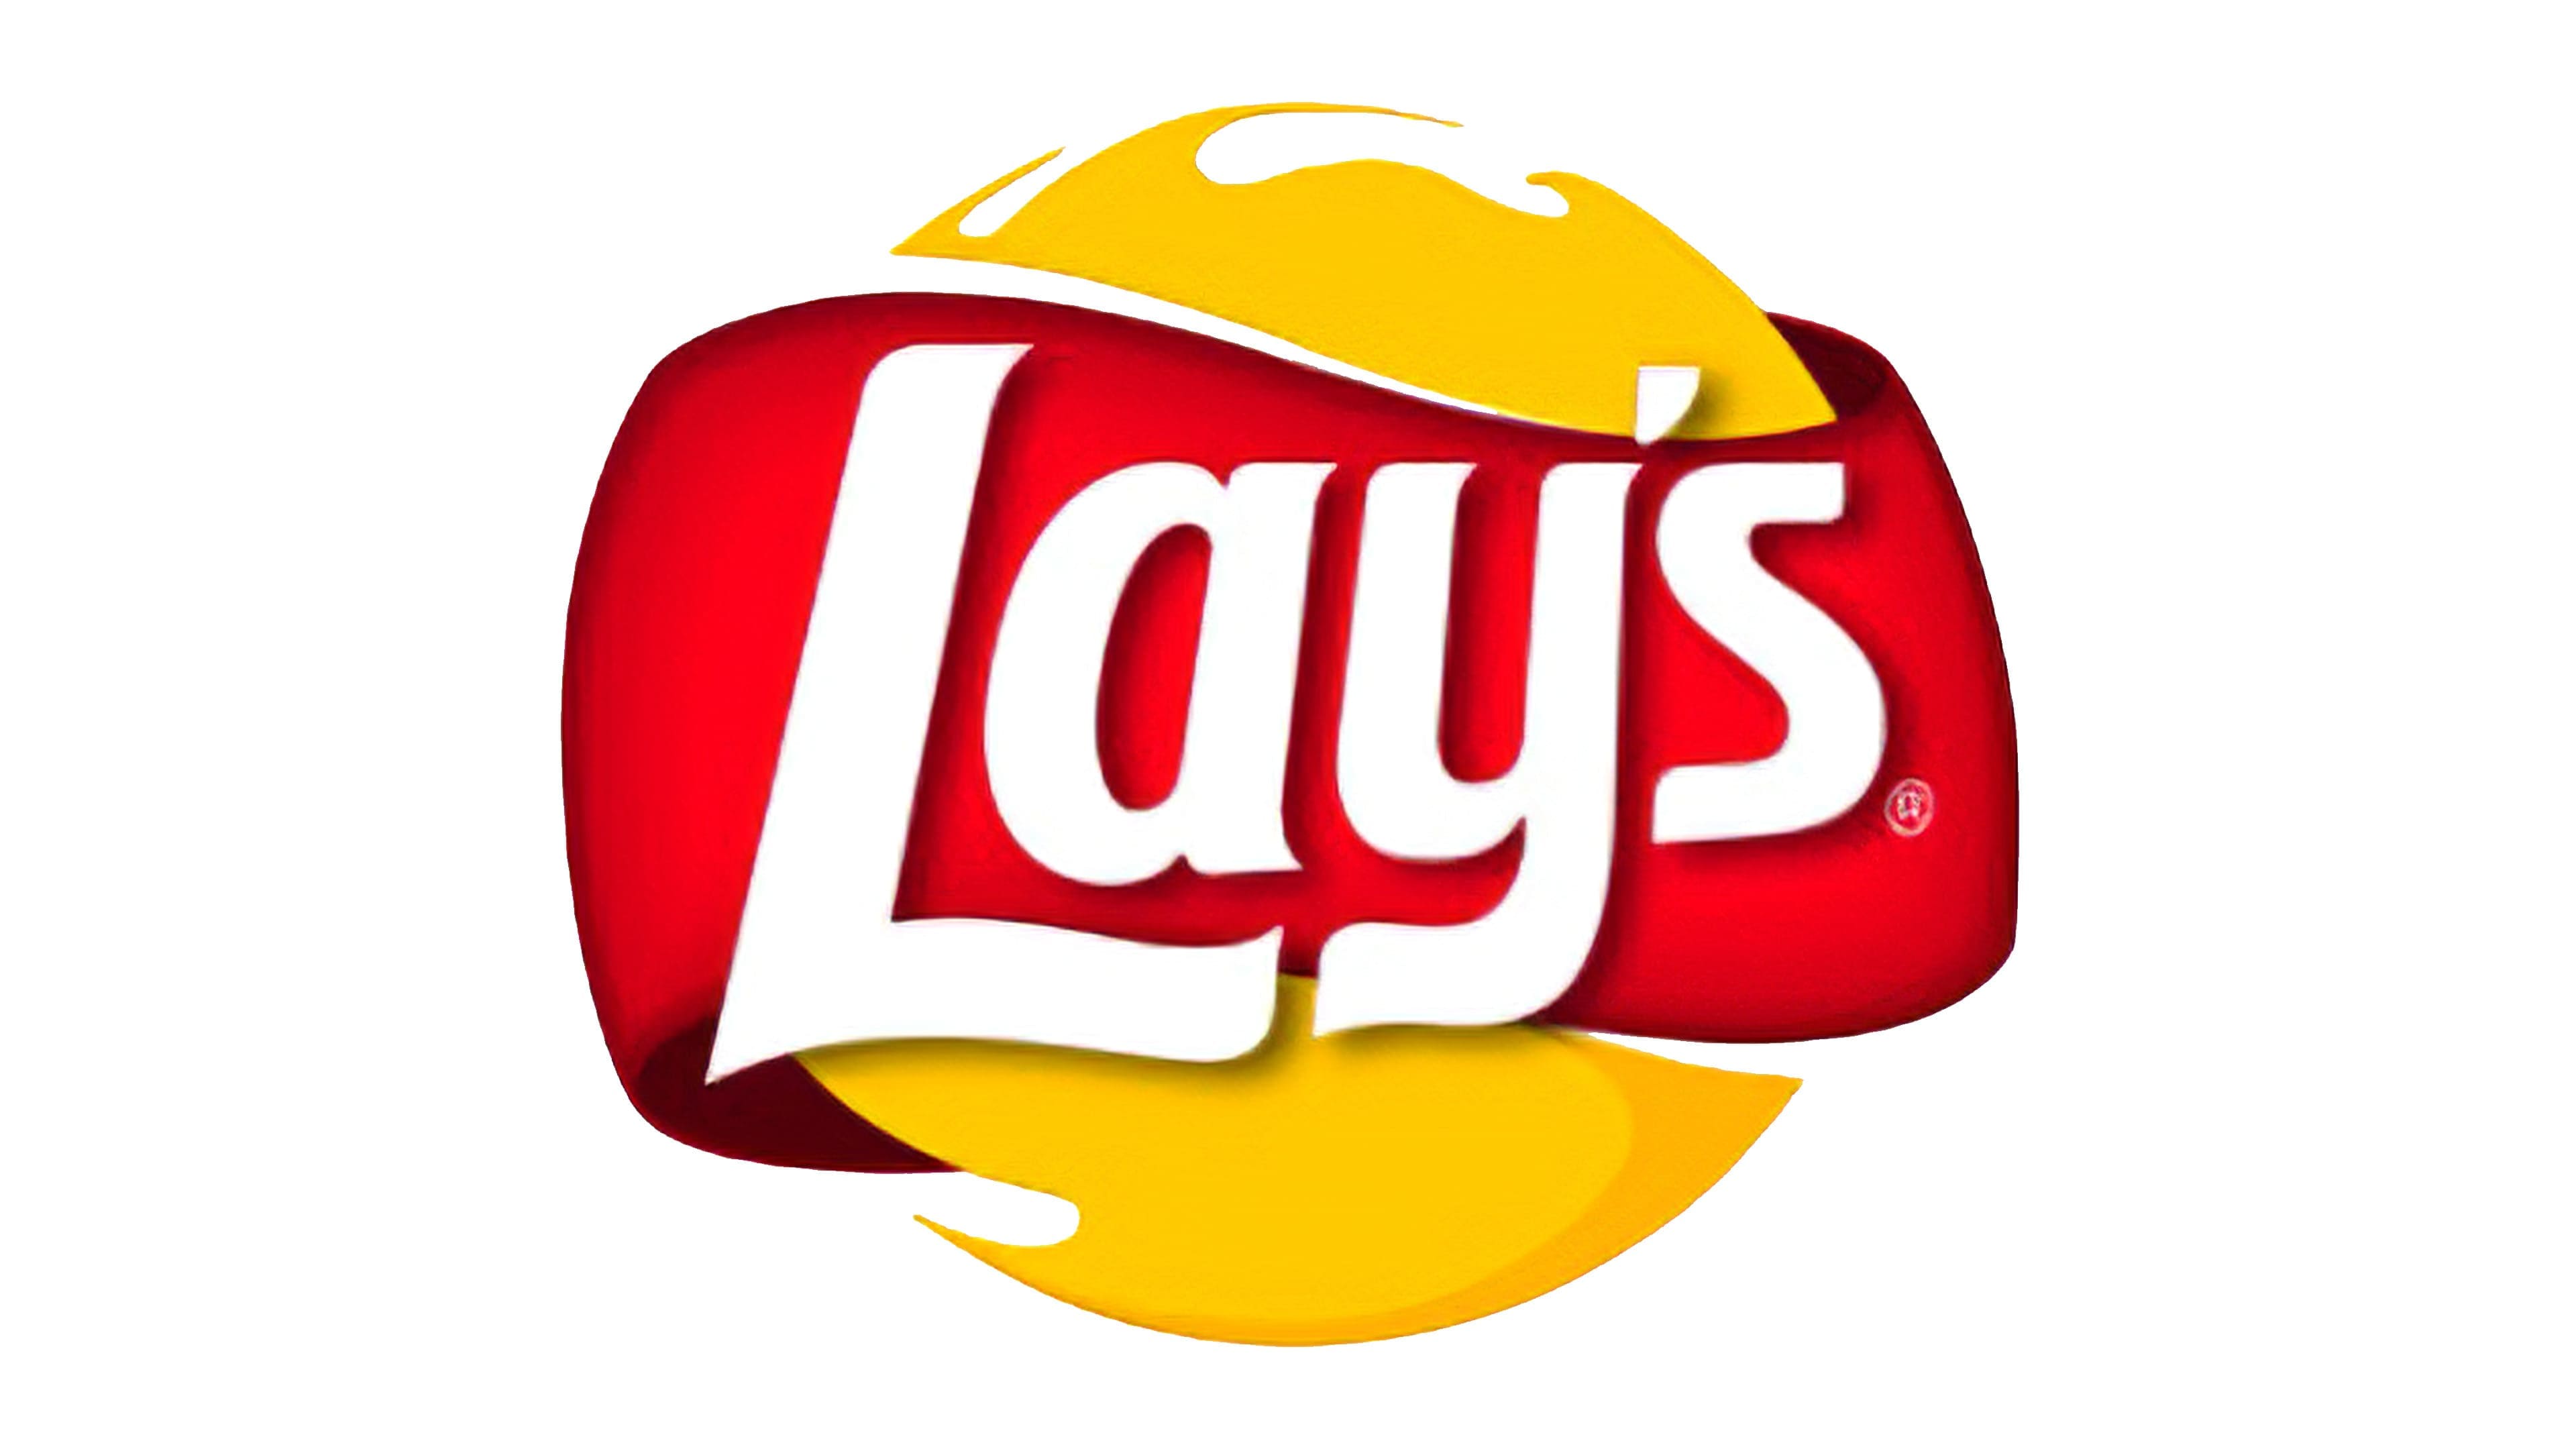 Lay's Logo, PNG, Symbol, History, Meaning